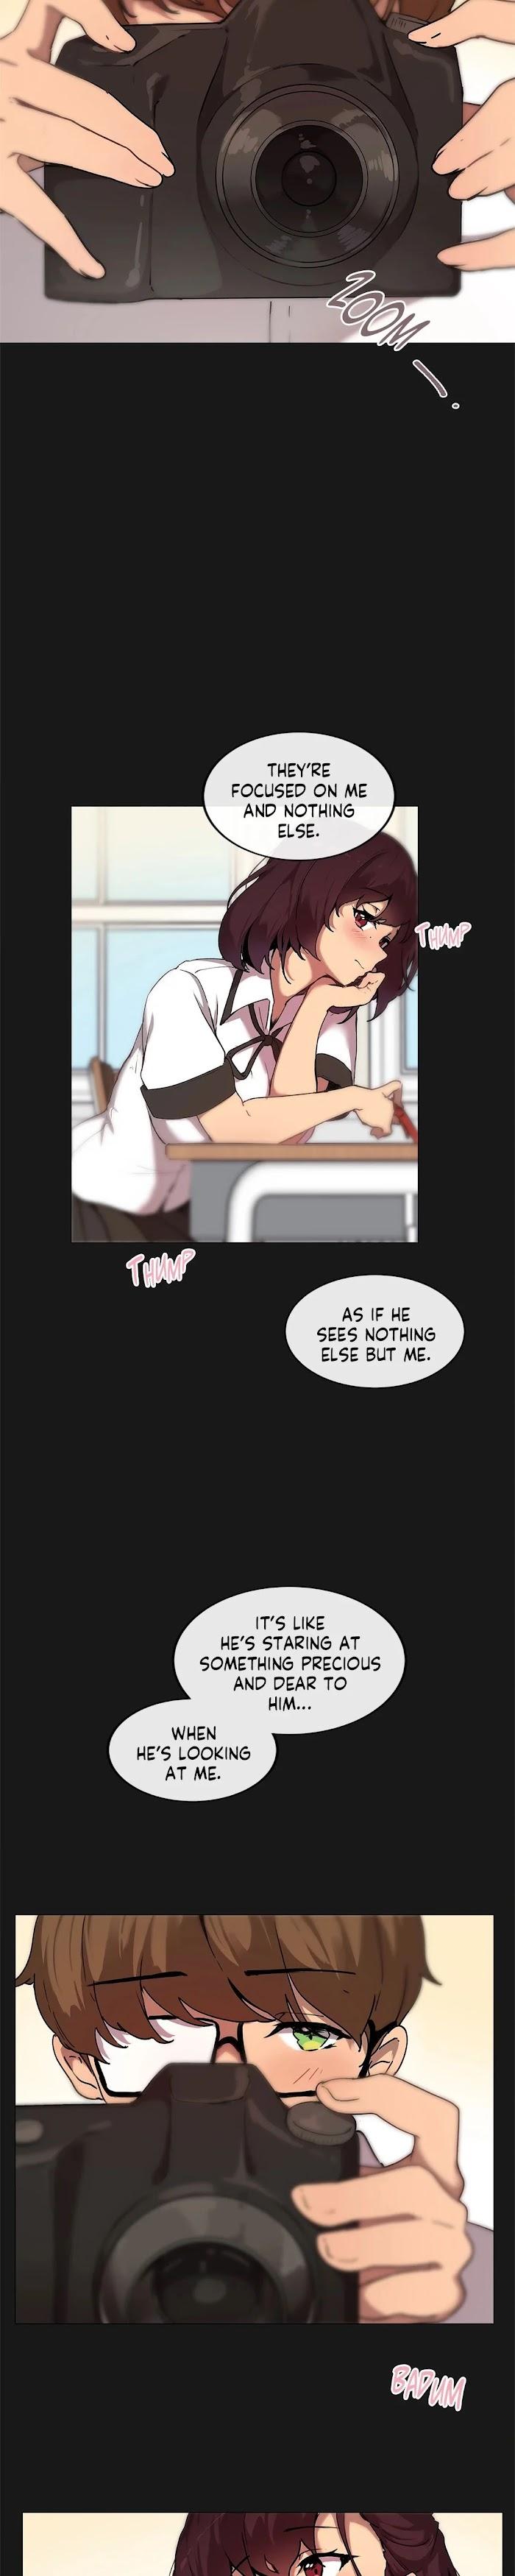 [Dumangoon, 130F] Sexcape Room: Wipe Out Ch.9/9 [English] [Manhwa PDF] Completed 105